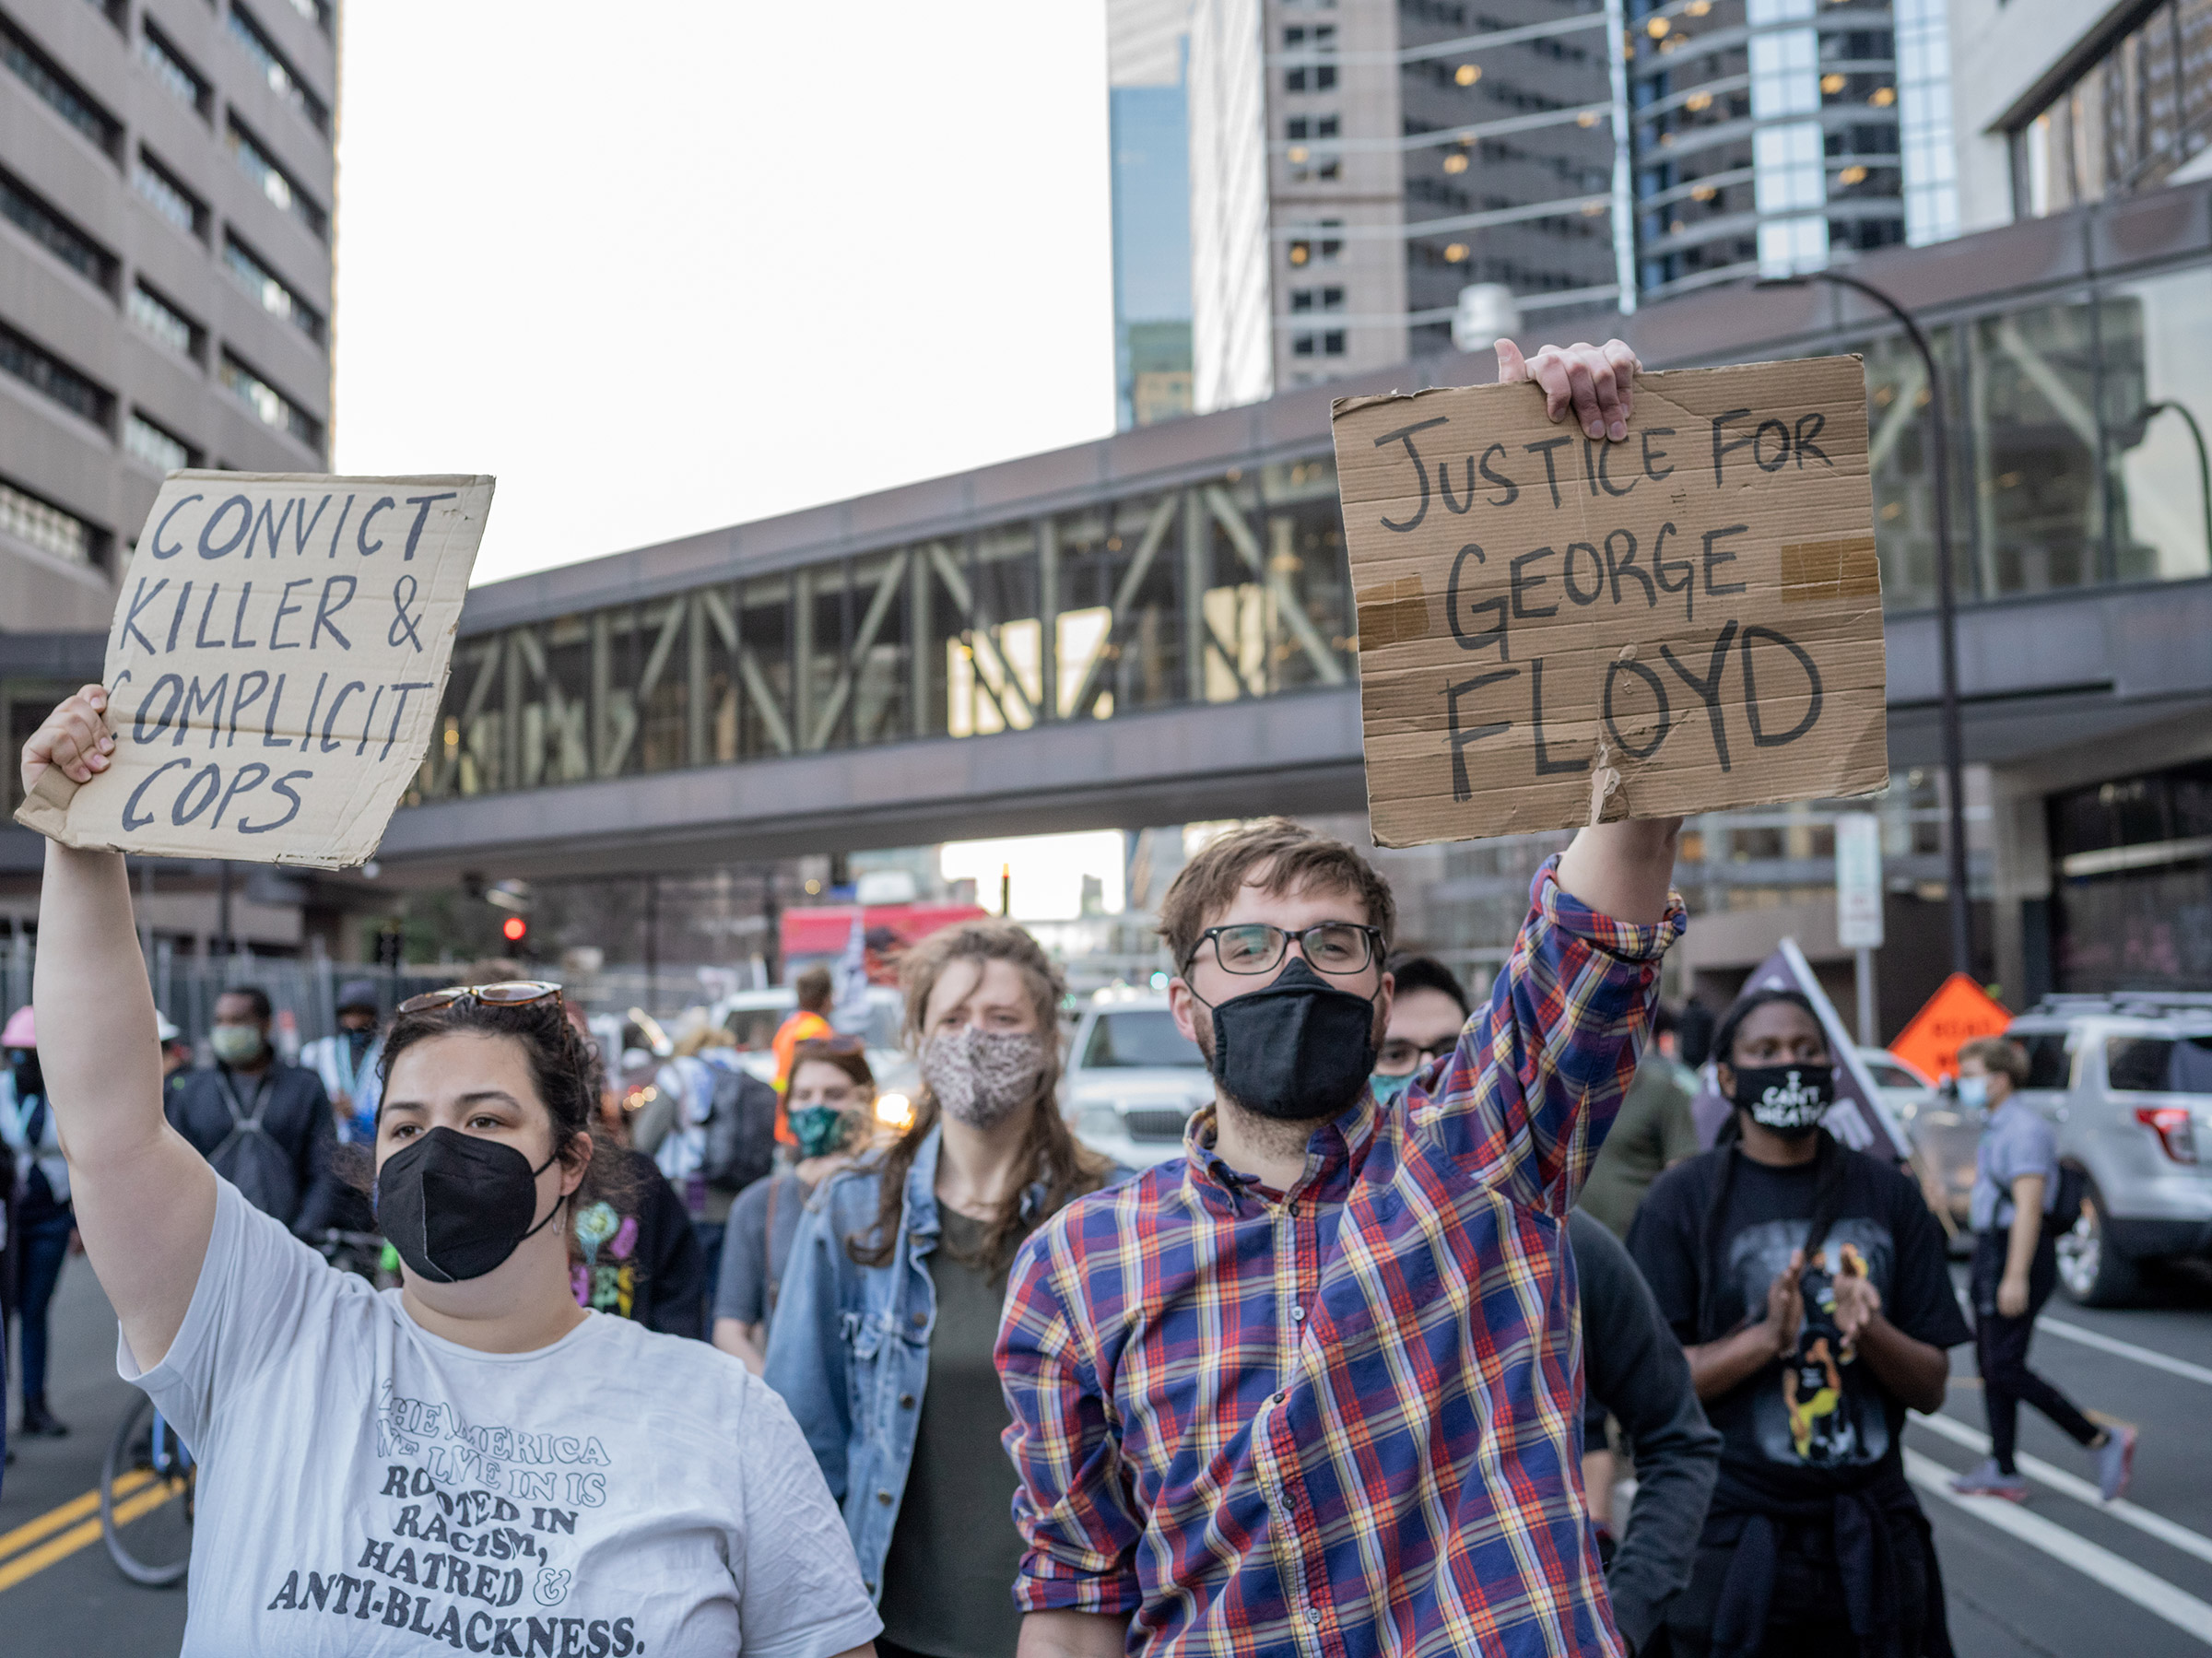 Protesters march during the trial in Minneapolis. (Ruddy Roye for TIME)